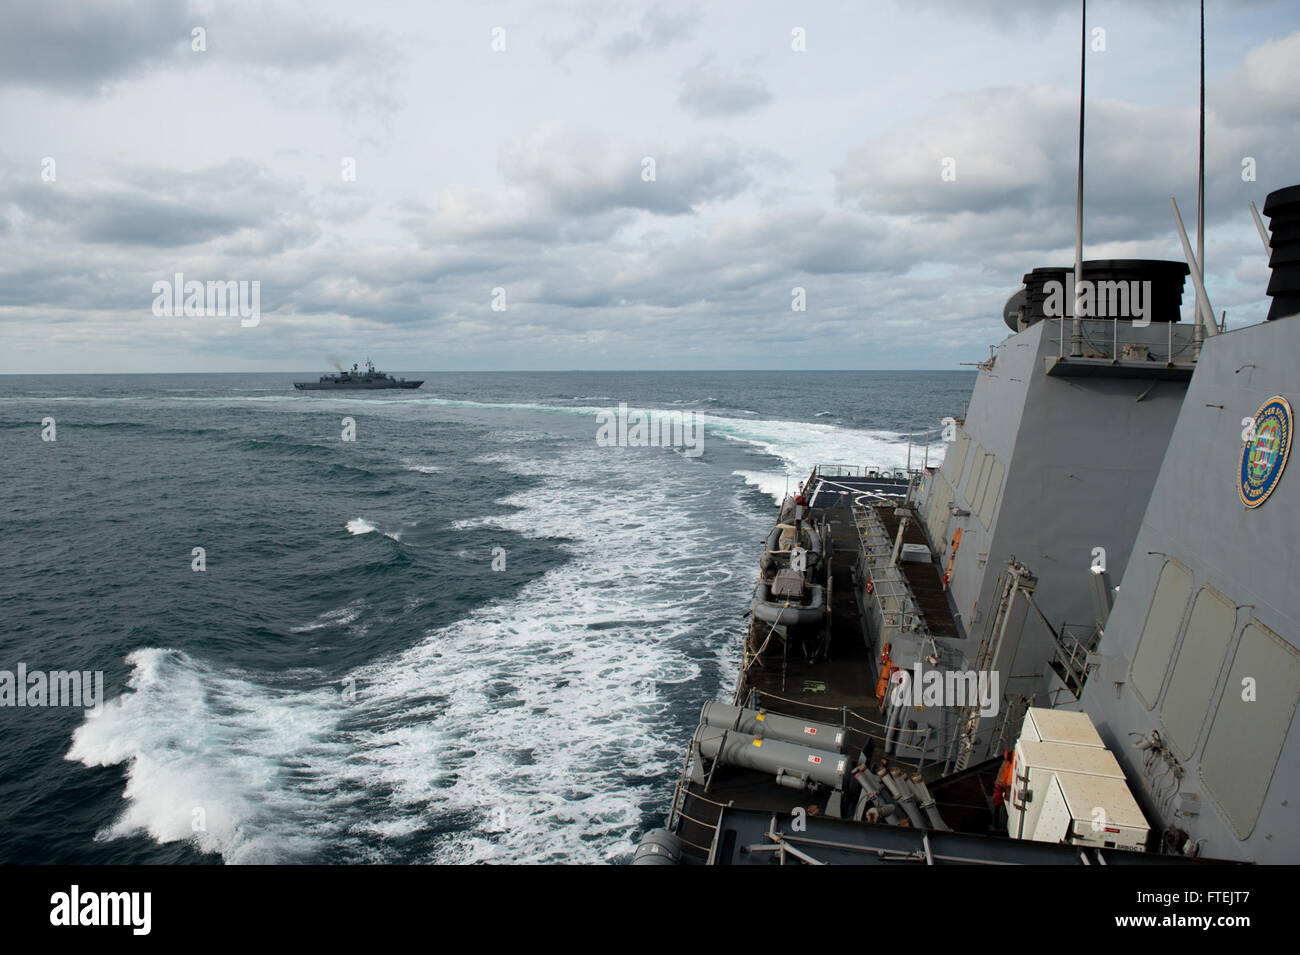 BLACK SEA (Dec. 28, 2014) USS Donald Cook (DDG 75) conducts maneuvers with the Turkish navy Dec. 28, 2014. Donald Cook, an Arleigh Burke-class guided-missile destroyer, forward-deployed to Rota, Spain, is conducting naval operations in the U.S. 6th Fleet area of operations in support of U.S. national security interests in Europe. Stock Photo